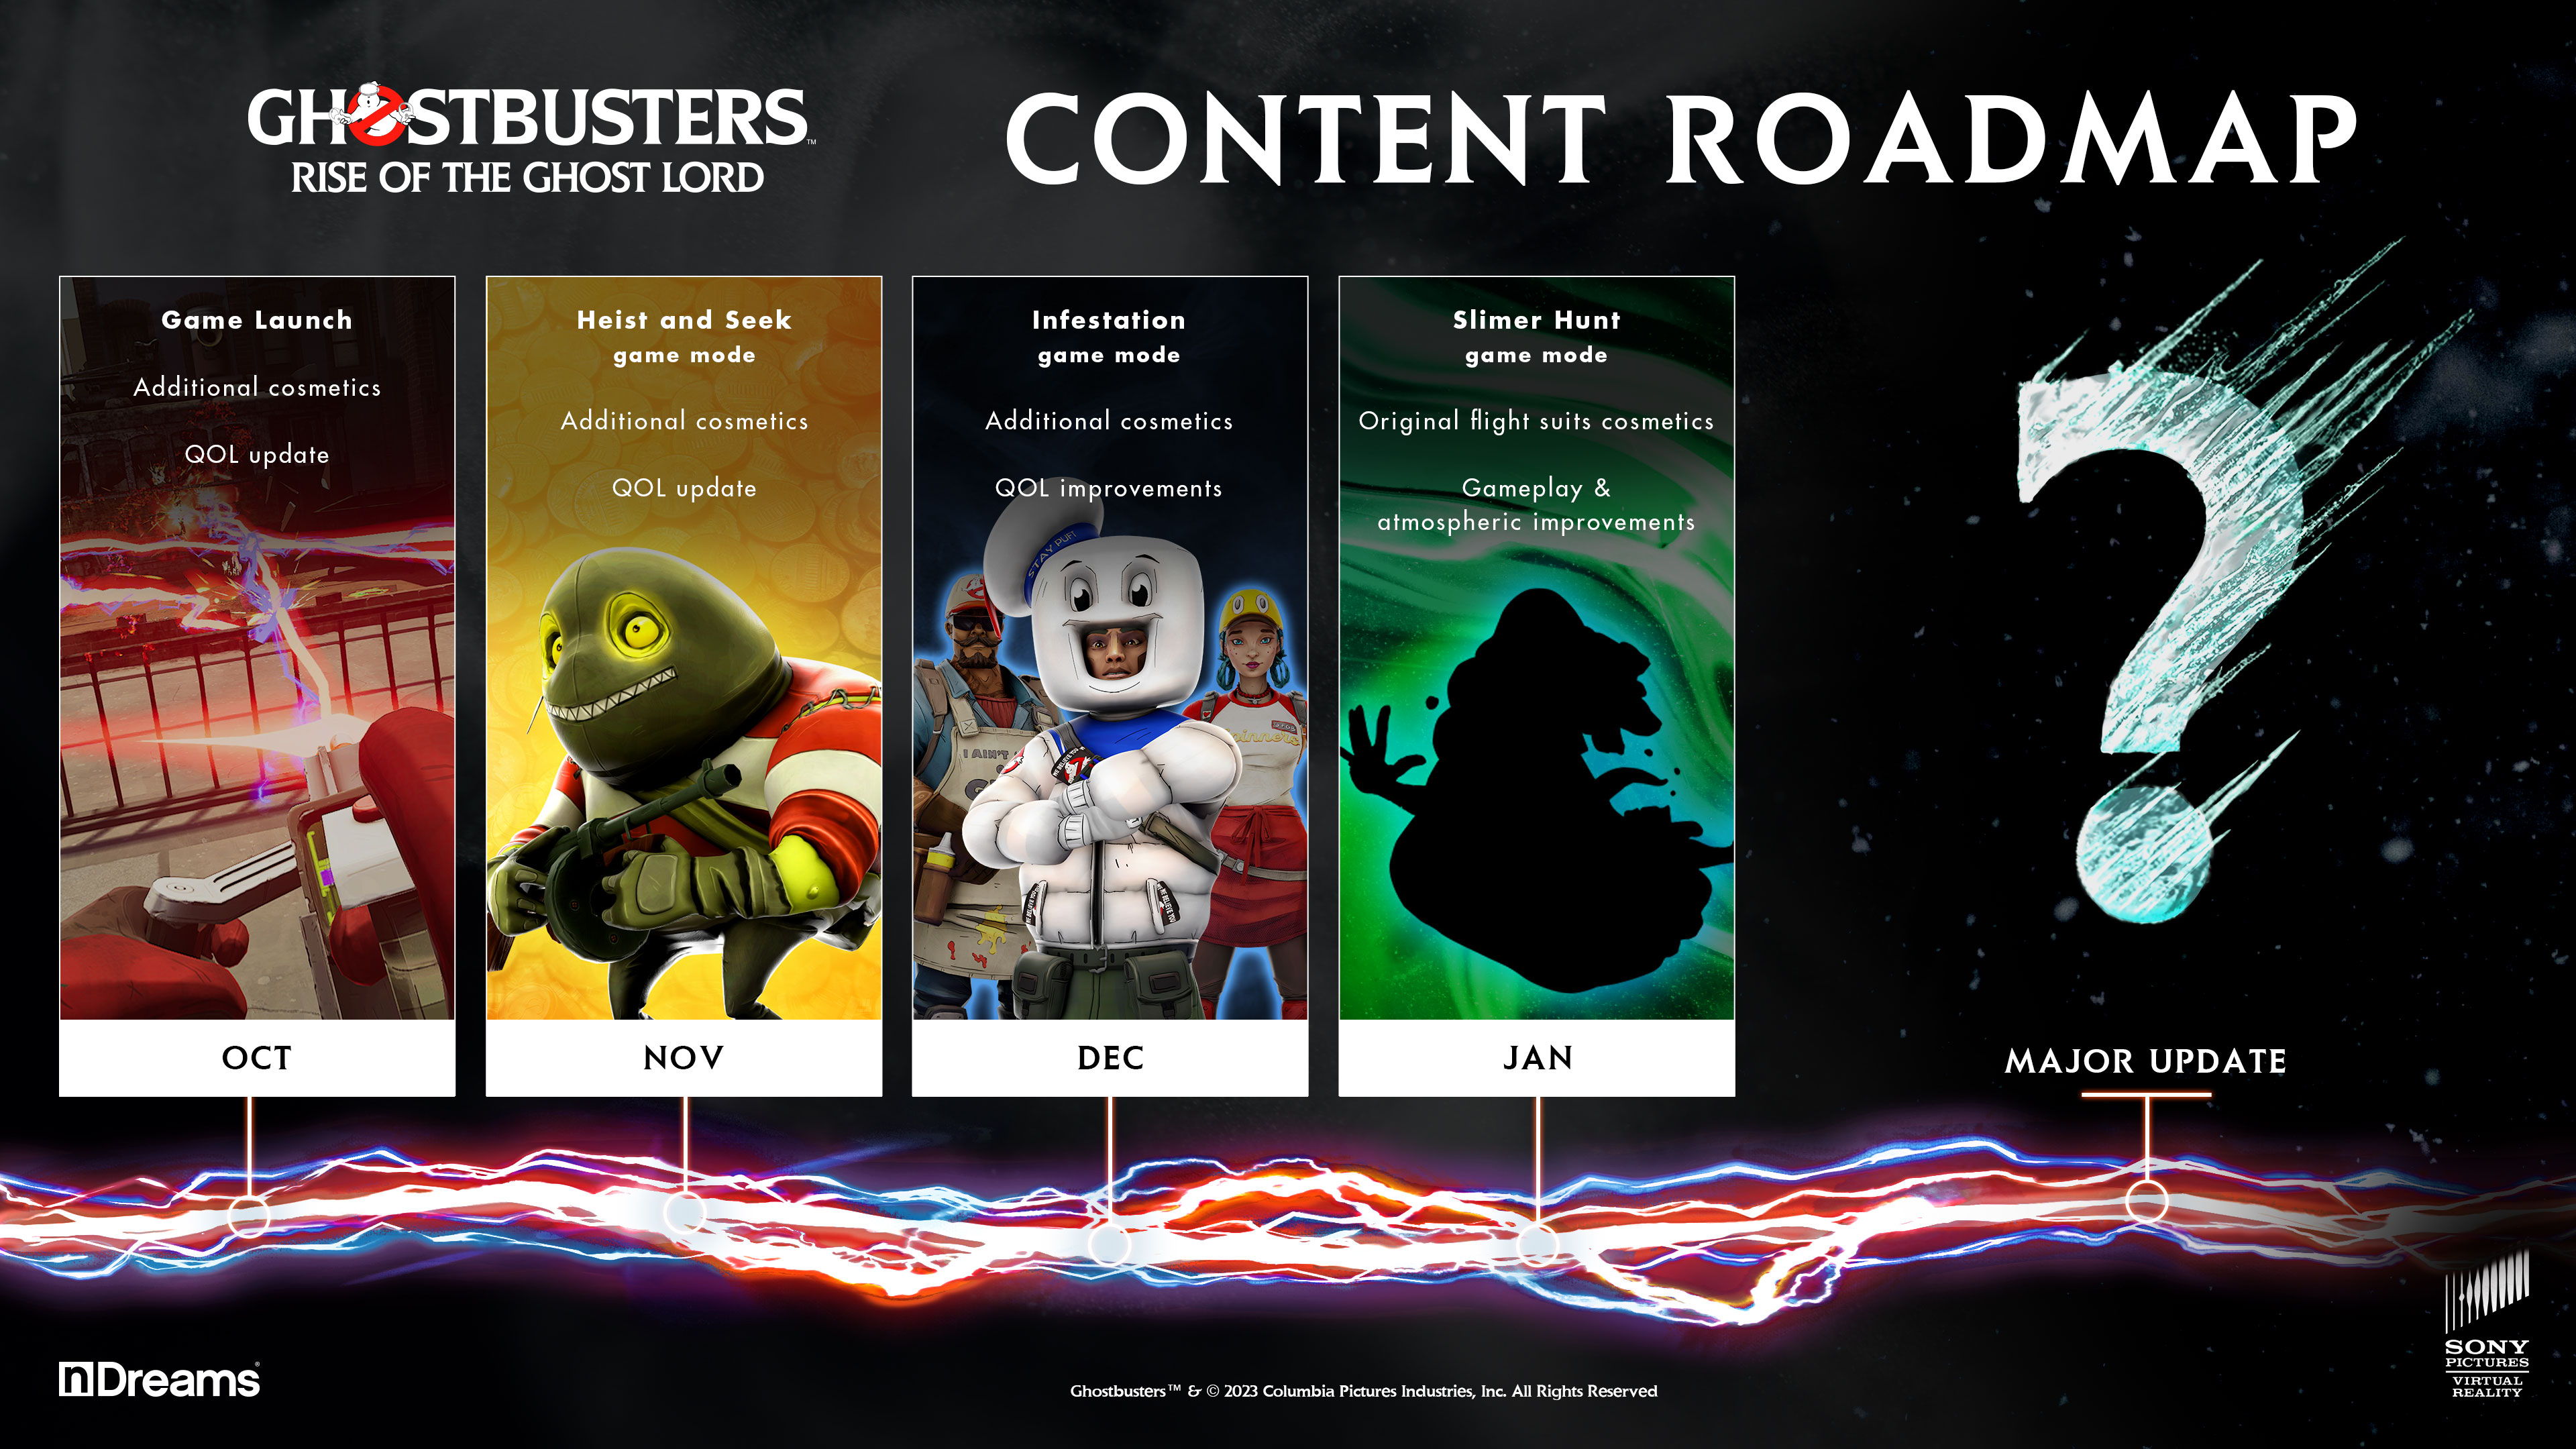 Ghostbusters: Rise of the Ghost Lord - Expanded Roadmap